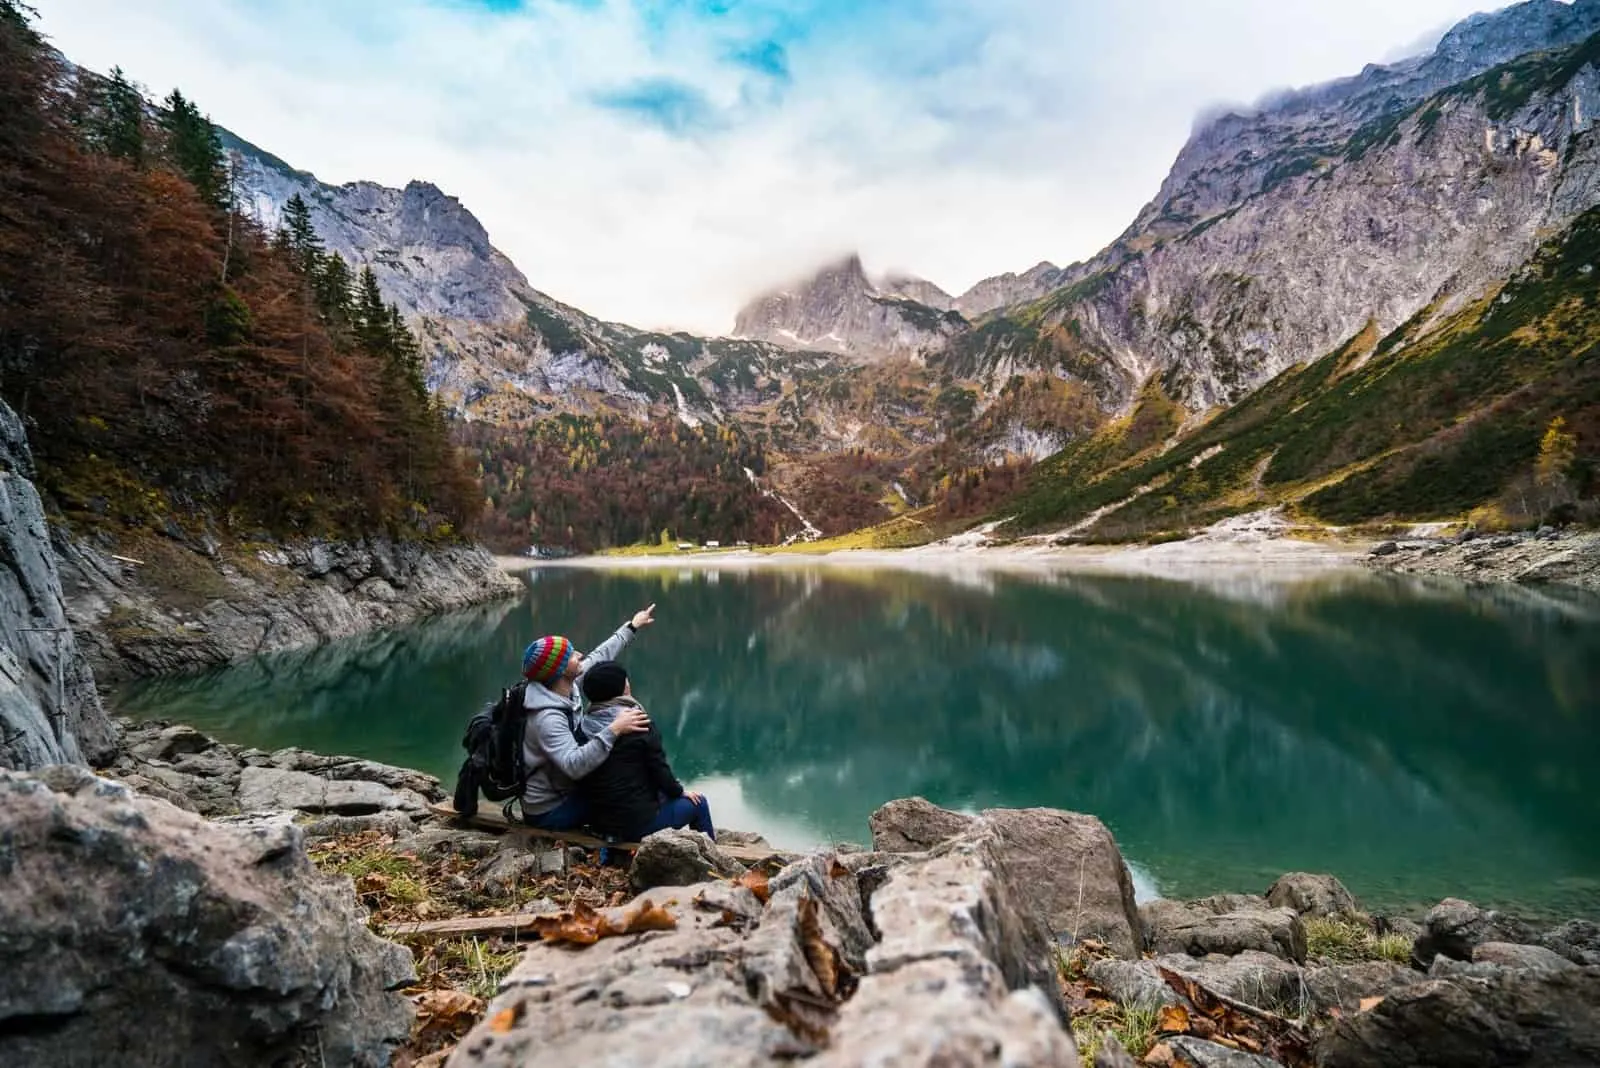 man and woman sitting on rock looking at mountain